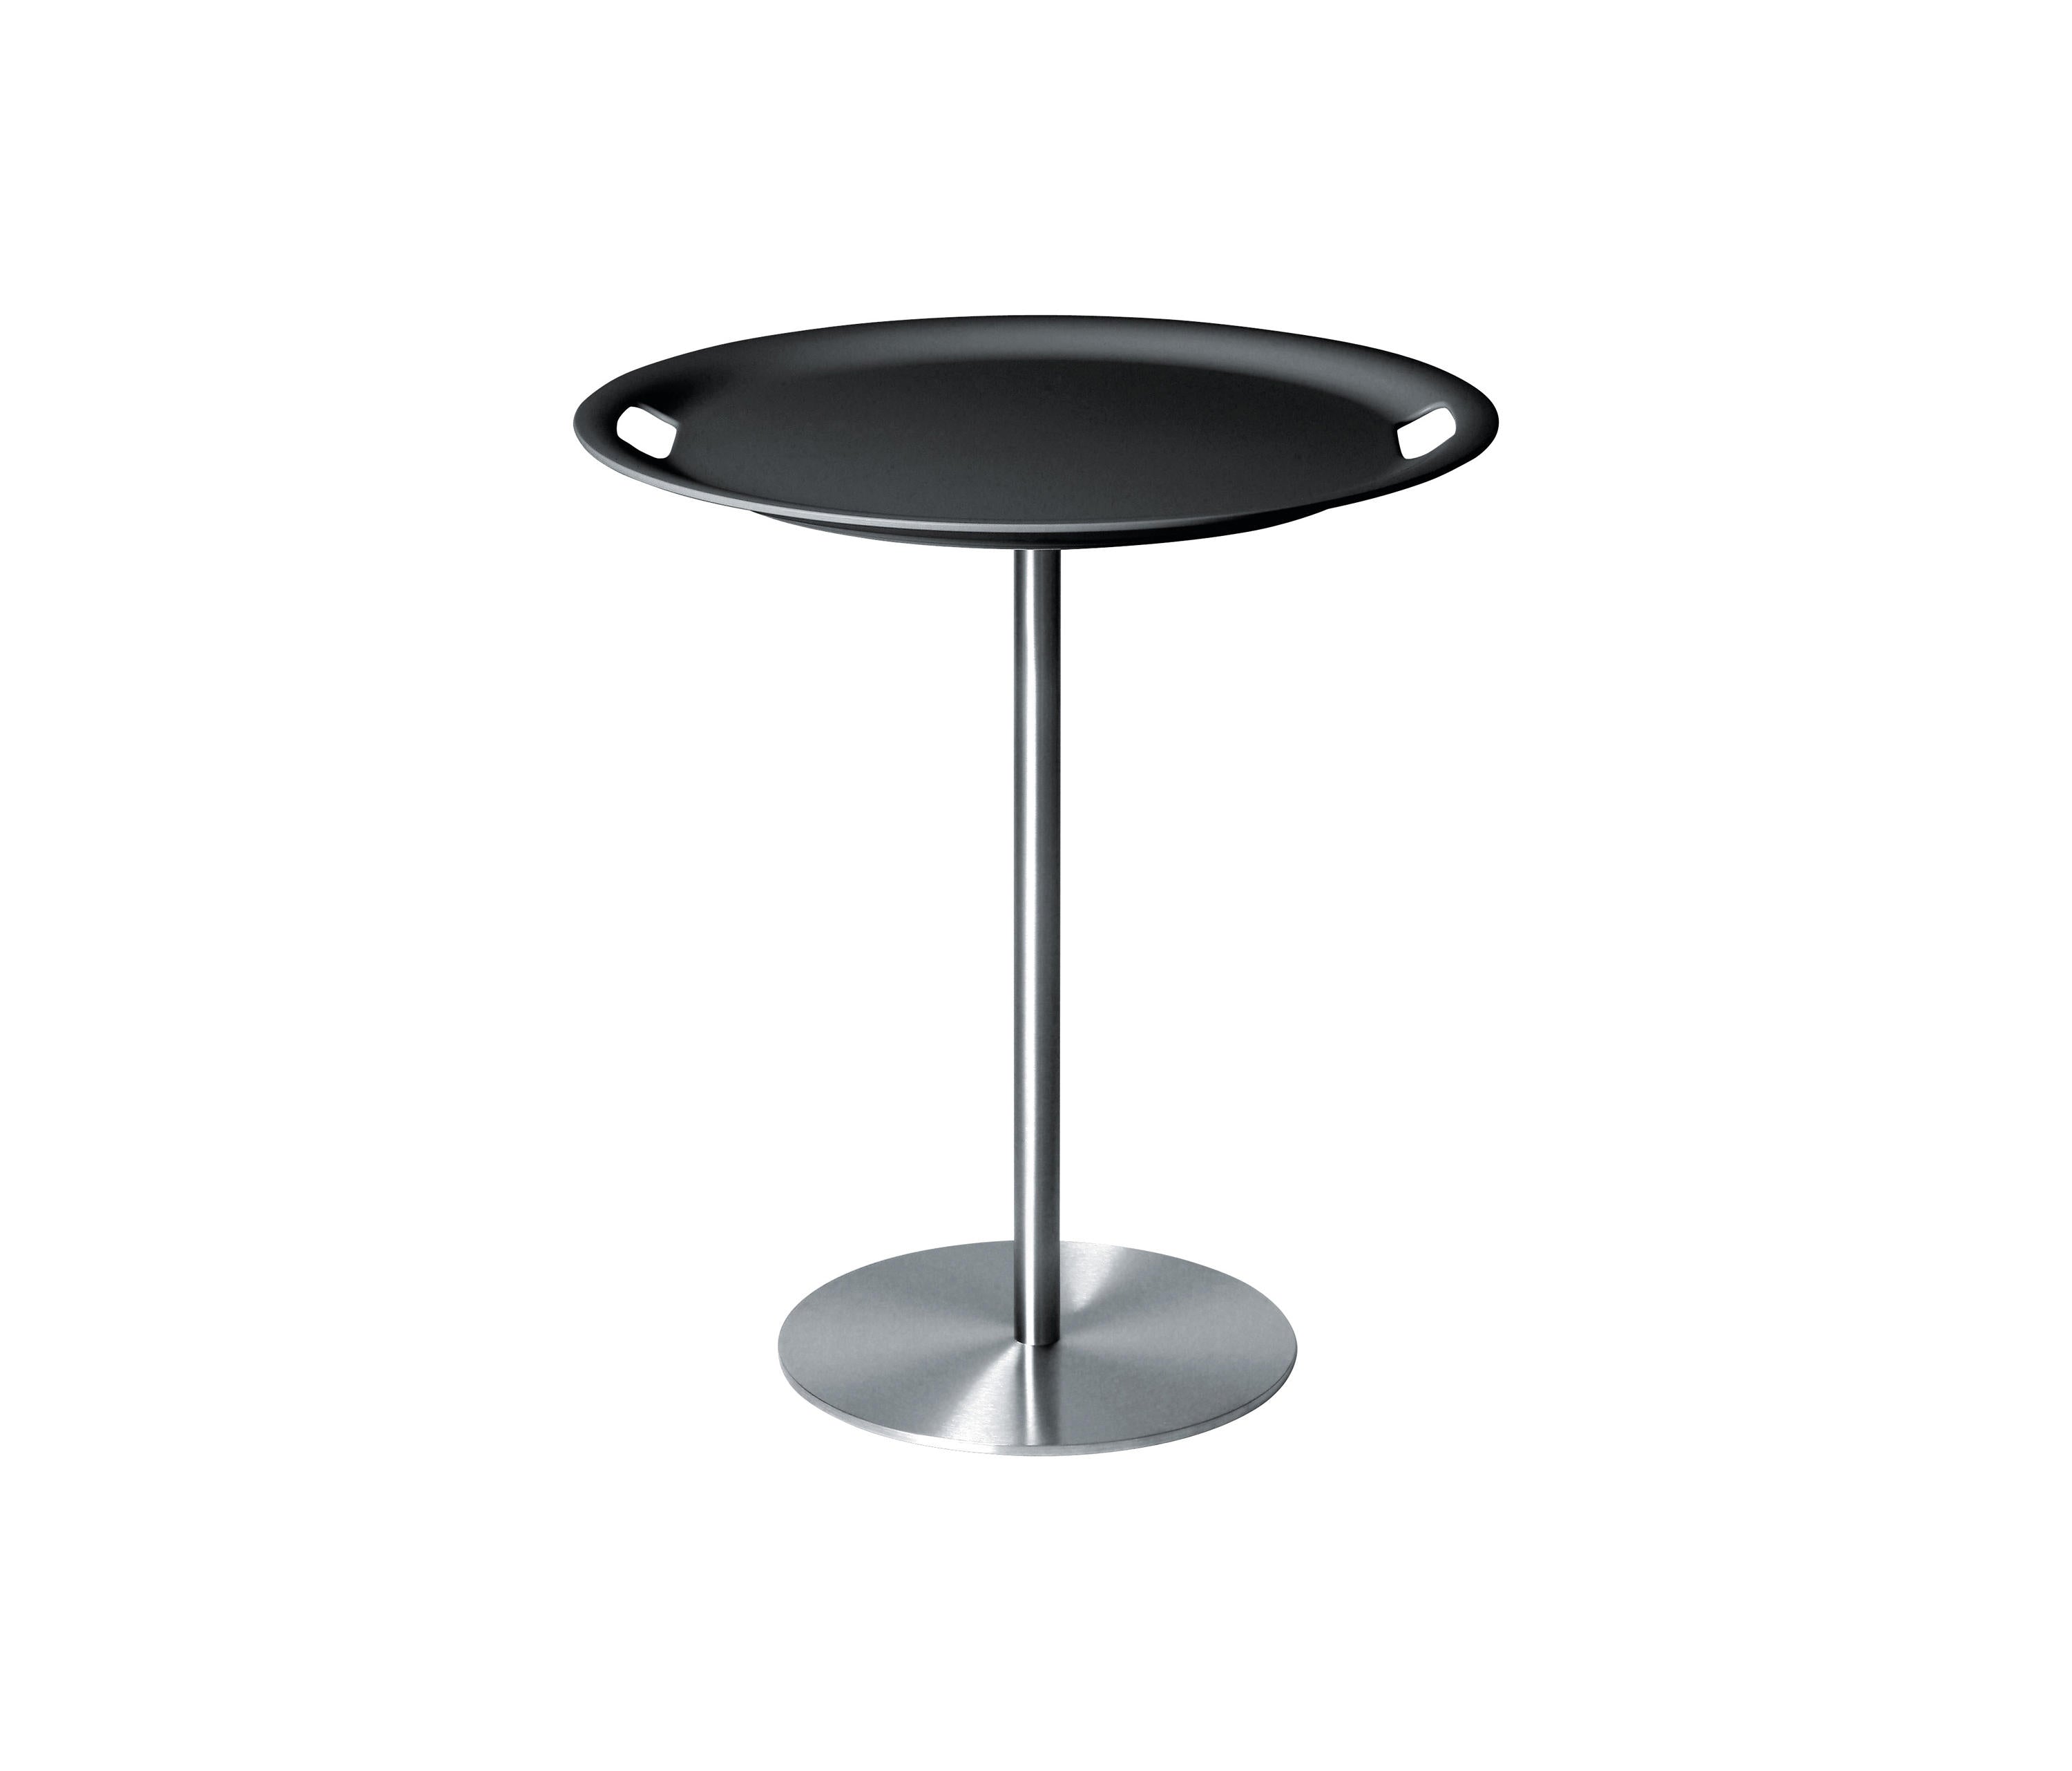 JM12 DG Op-la tray/table, base in stainless steel, top and tray in ABS, dark grey